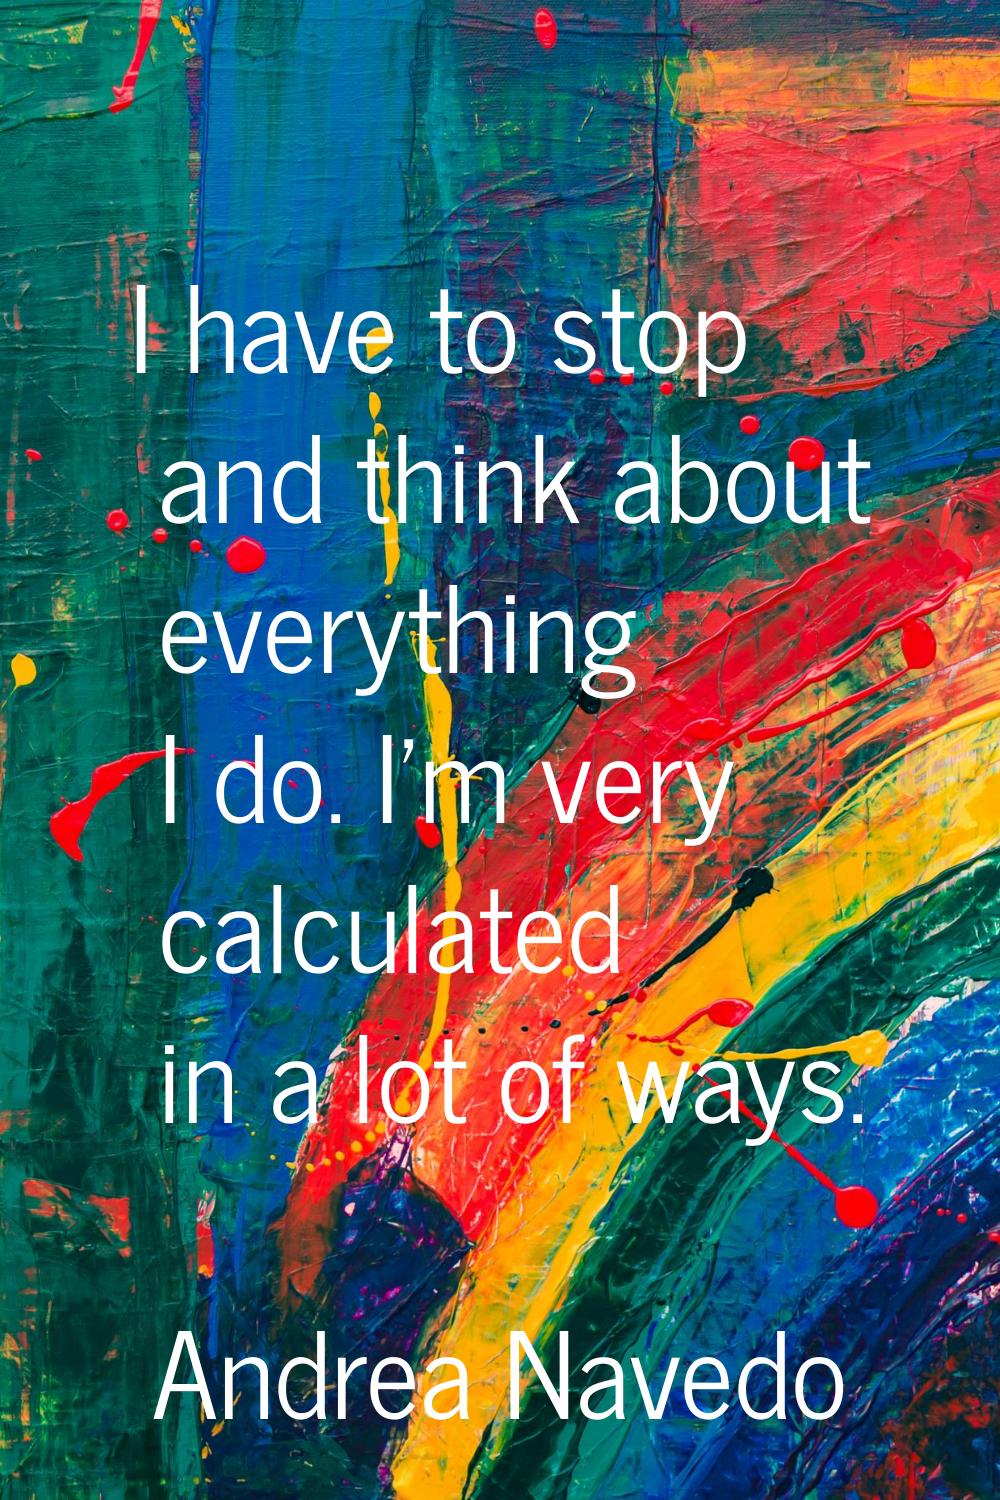 I have to stop and think about everything I do. I'm very calculated in a lot of ways.